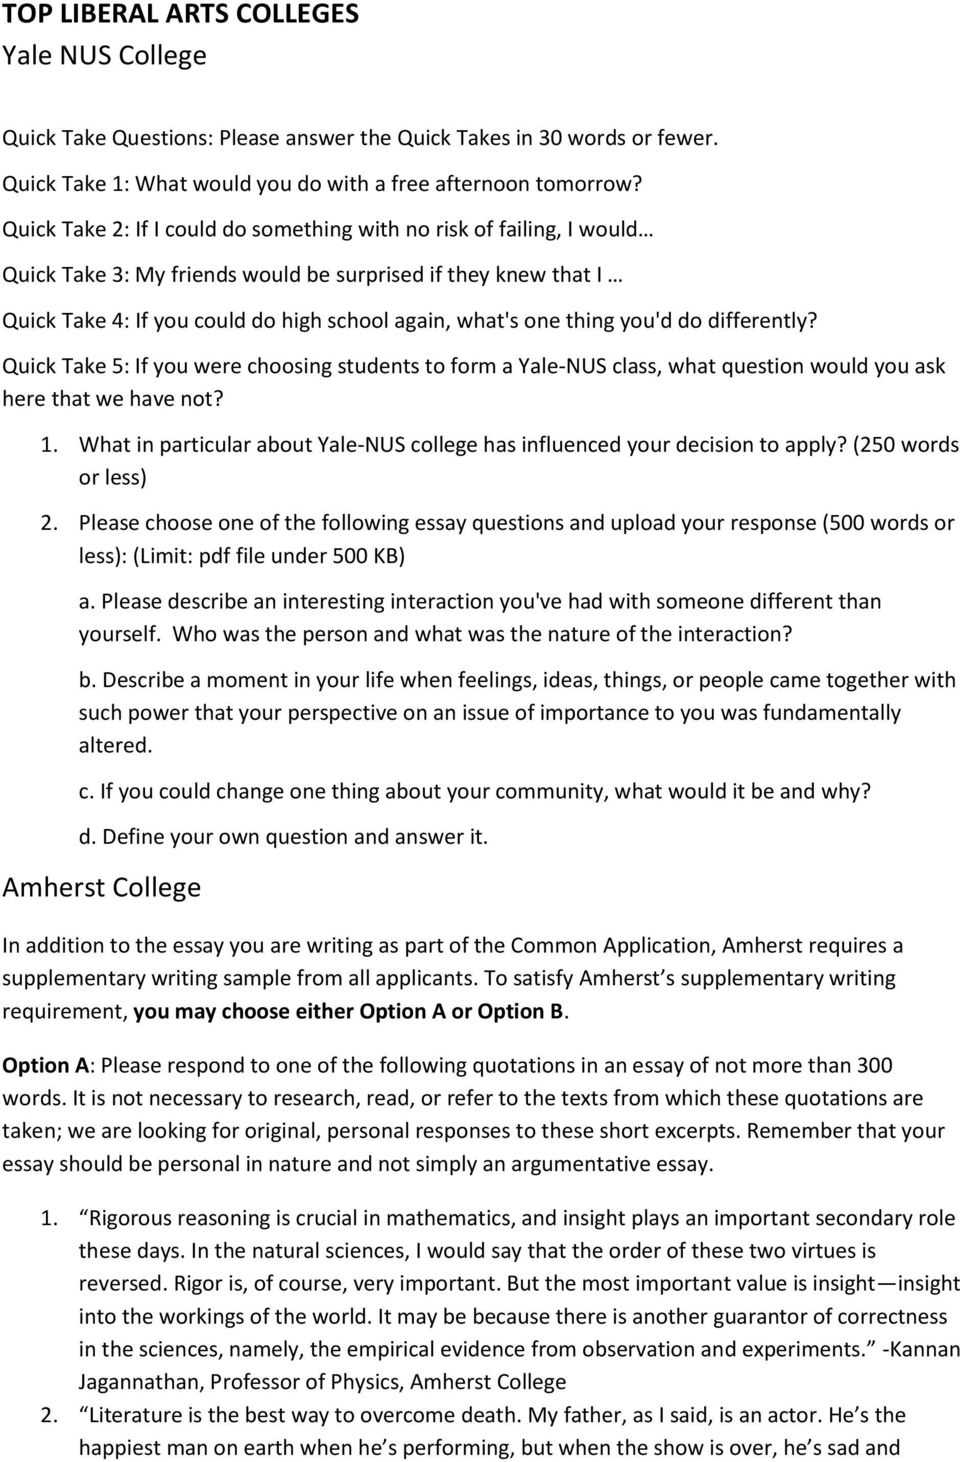 College Application Essay Examples Words Pdf Personal | Ceolpub For 500 Word Essay Template